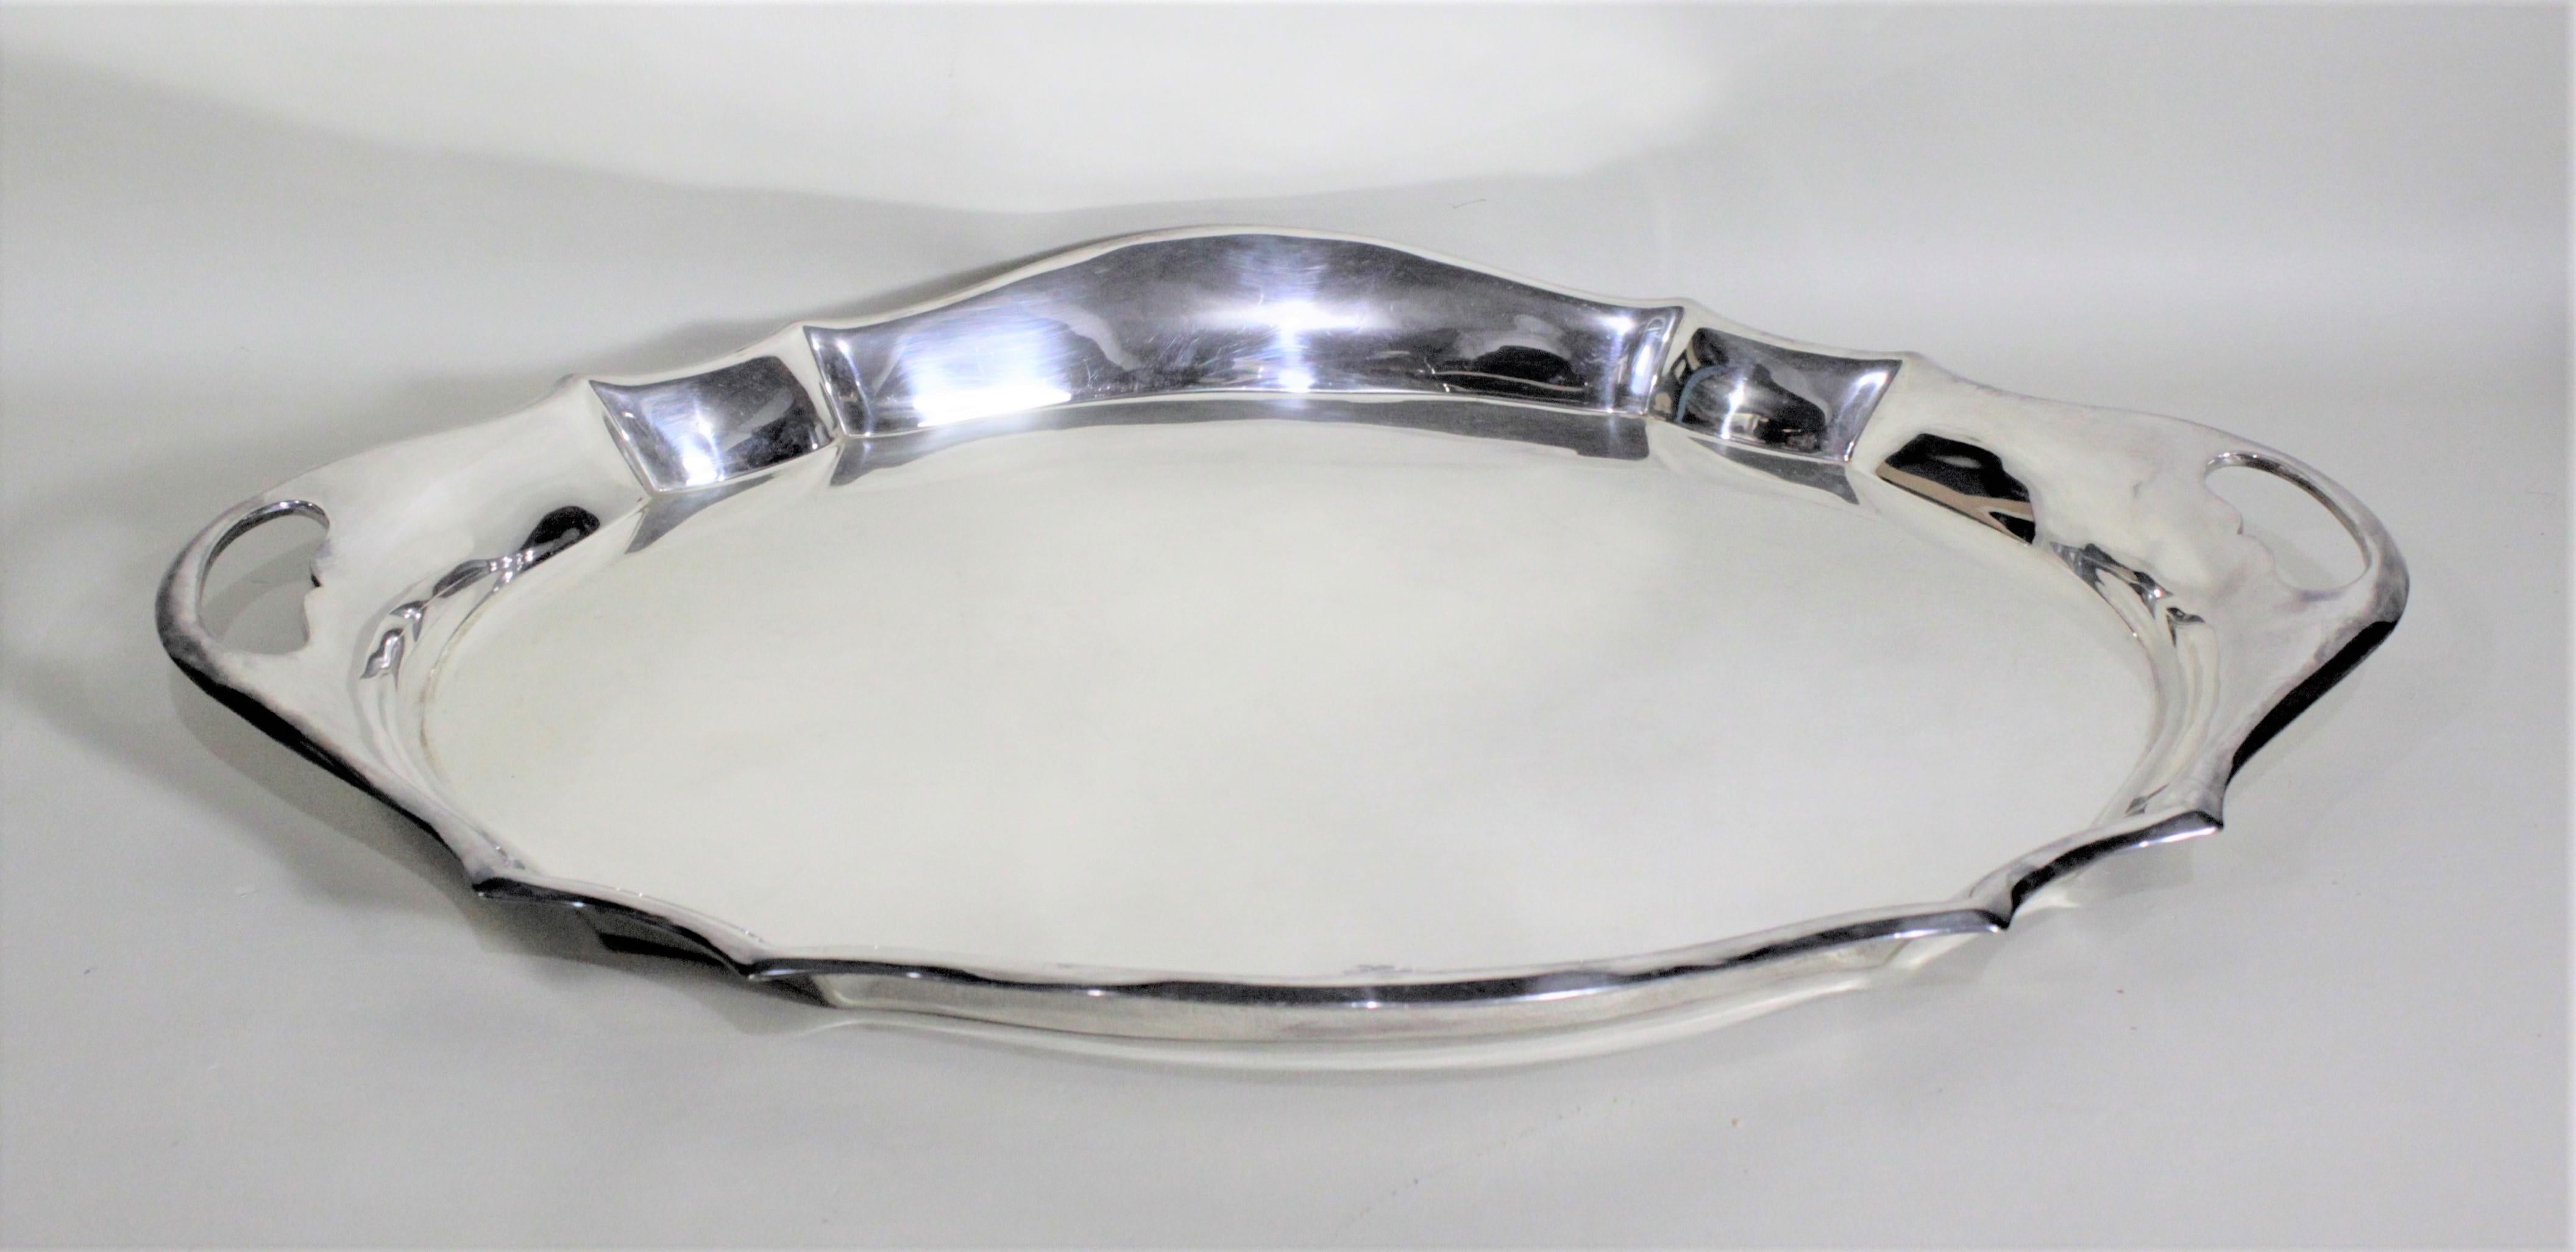 This antique silver plated serving tray was made in England in circa 1920 in a very modern streamlined design in the Art Deco style. This oval shaped tray has solid raised sides with a simple scrolling curved edges and handles cut in on either end.